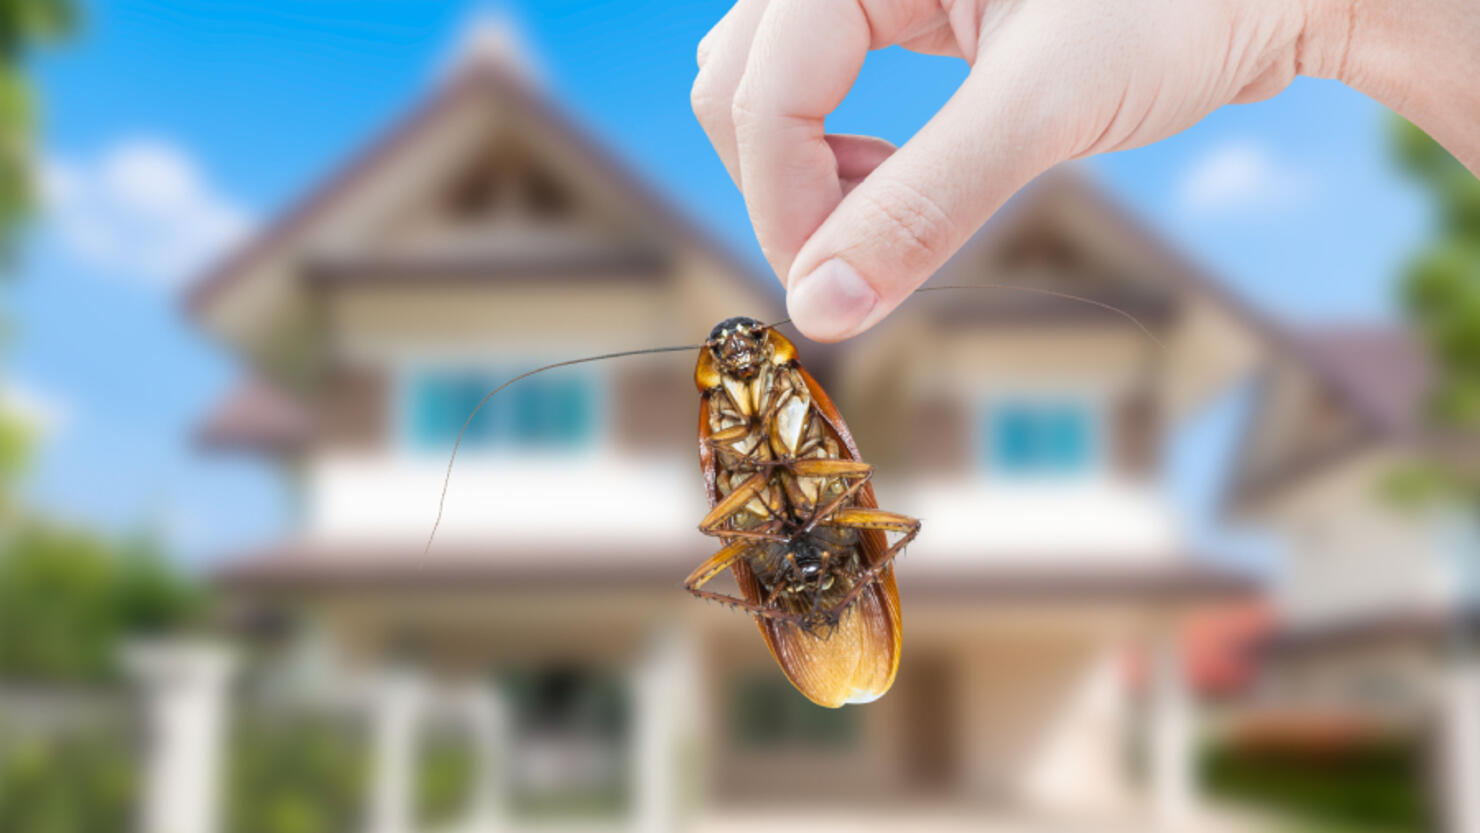 North Carolina Company Will Pay 2000 To Release Cockroaches In Your